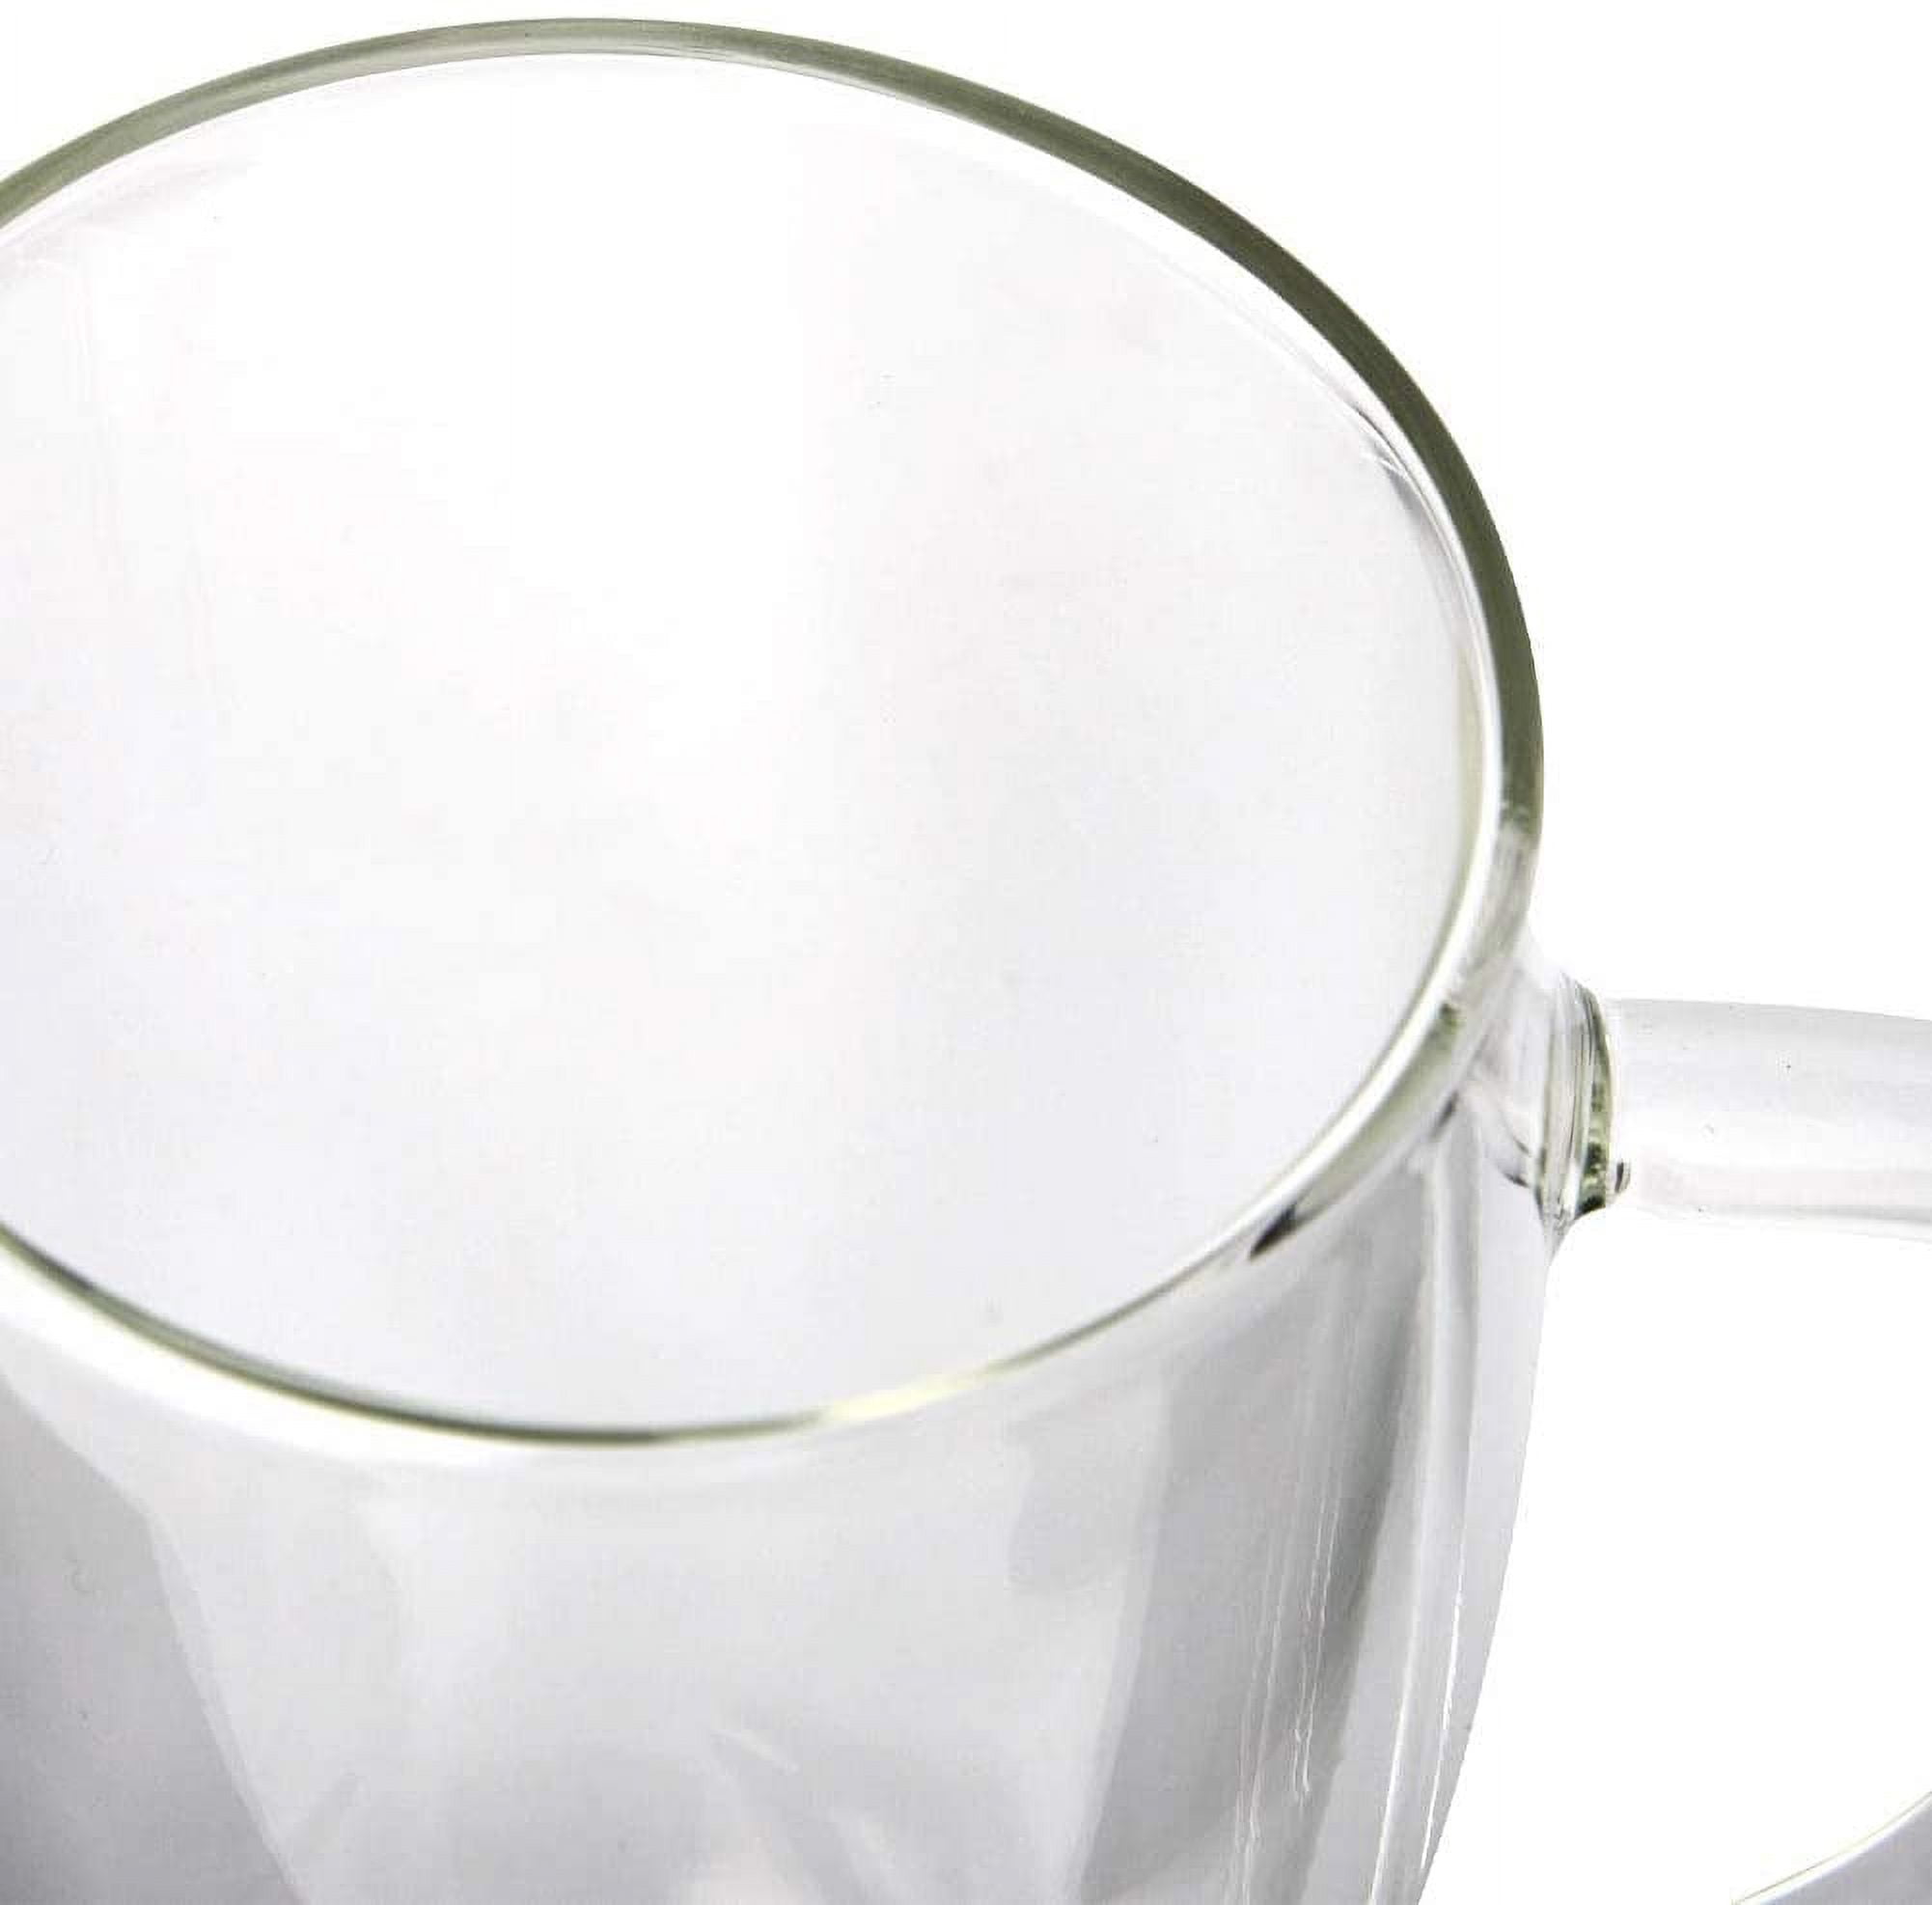 Free shipping】 Double wall design clear glass cup/ transparent Coffee –  zptableware